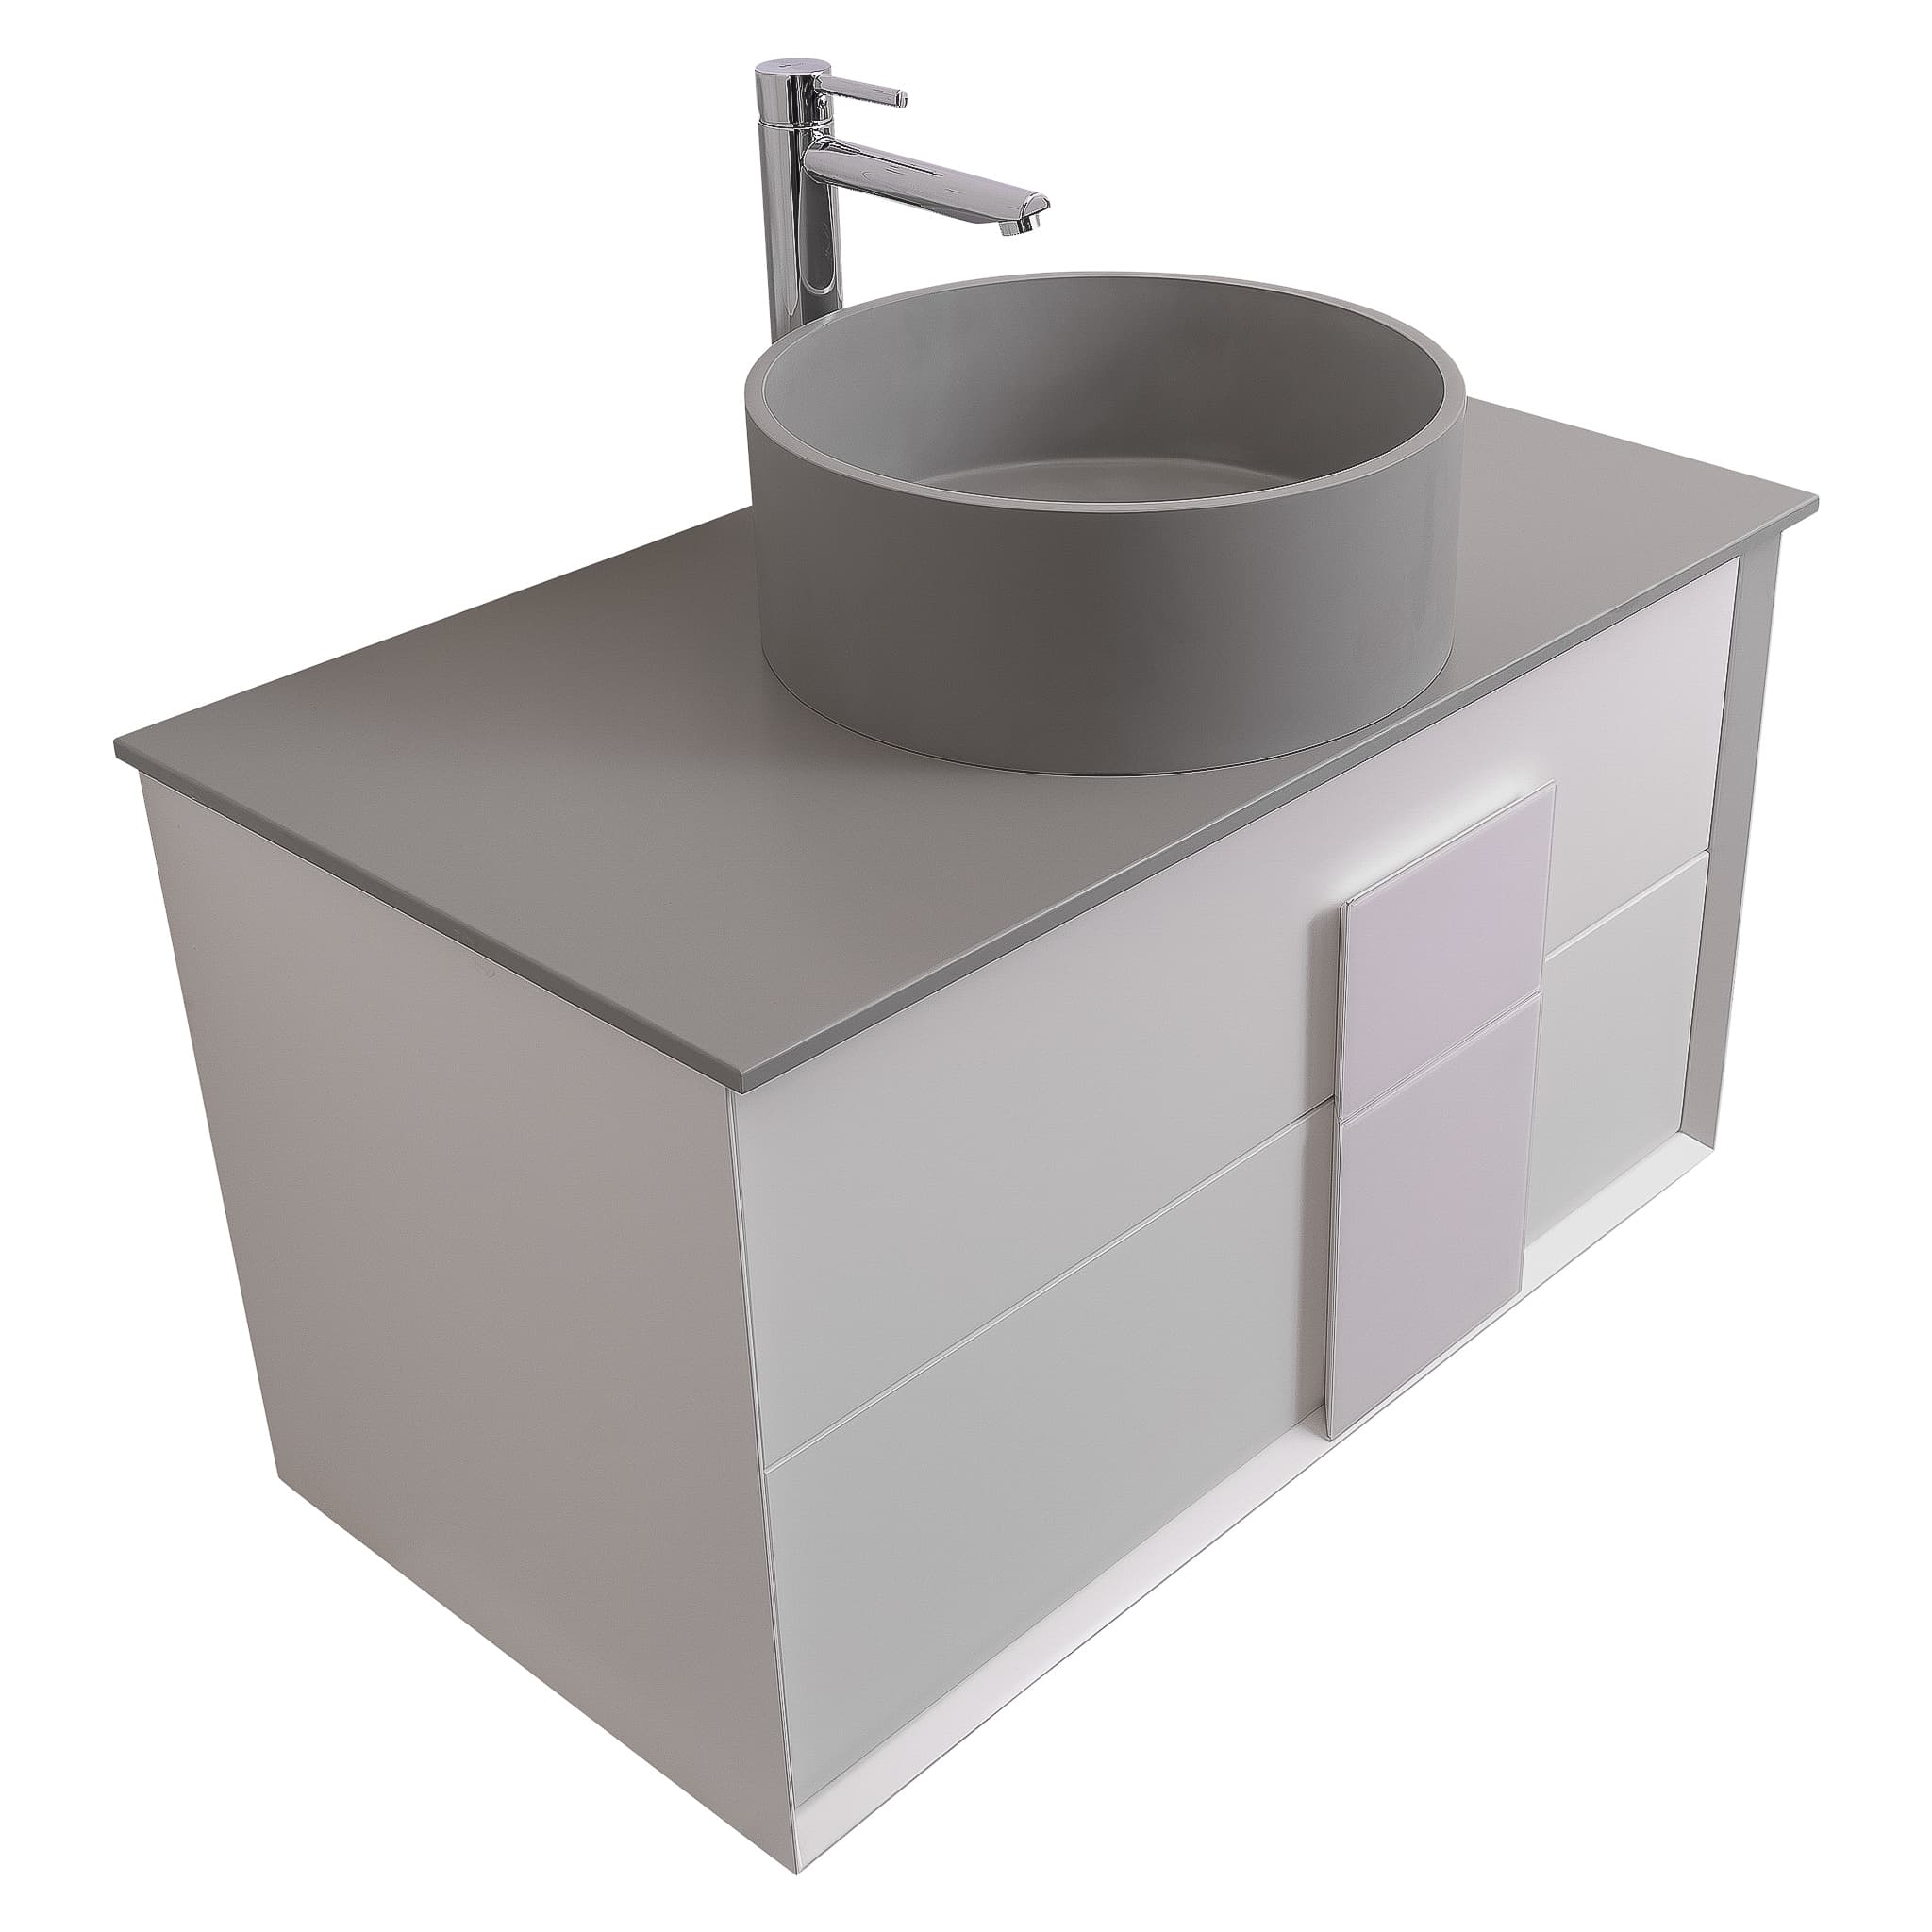 Piazza 31.5 Matte White With White Handle Cabinet, Solid Surface Flat Grey Counter and Round Solid Surface Grey Basin 1386, Wall Mounted Modern Vanity Set